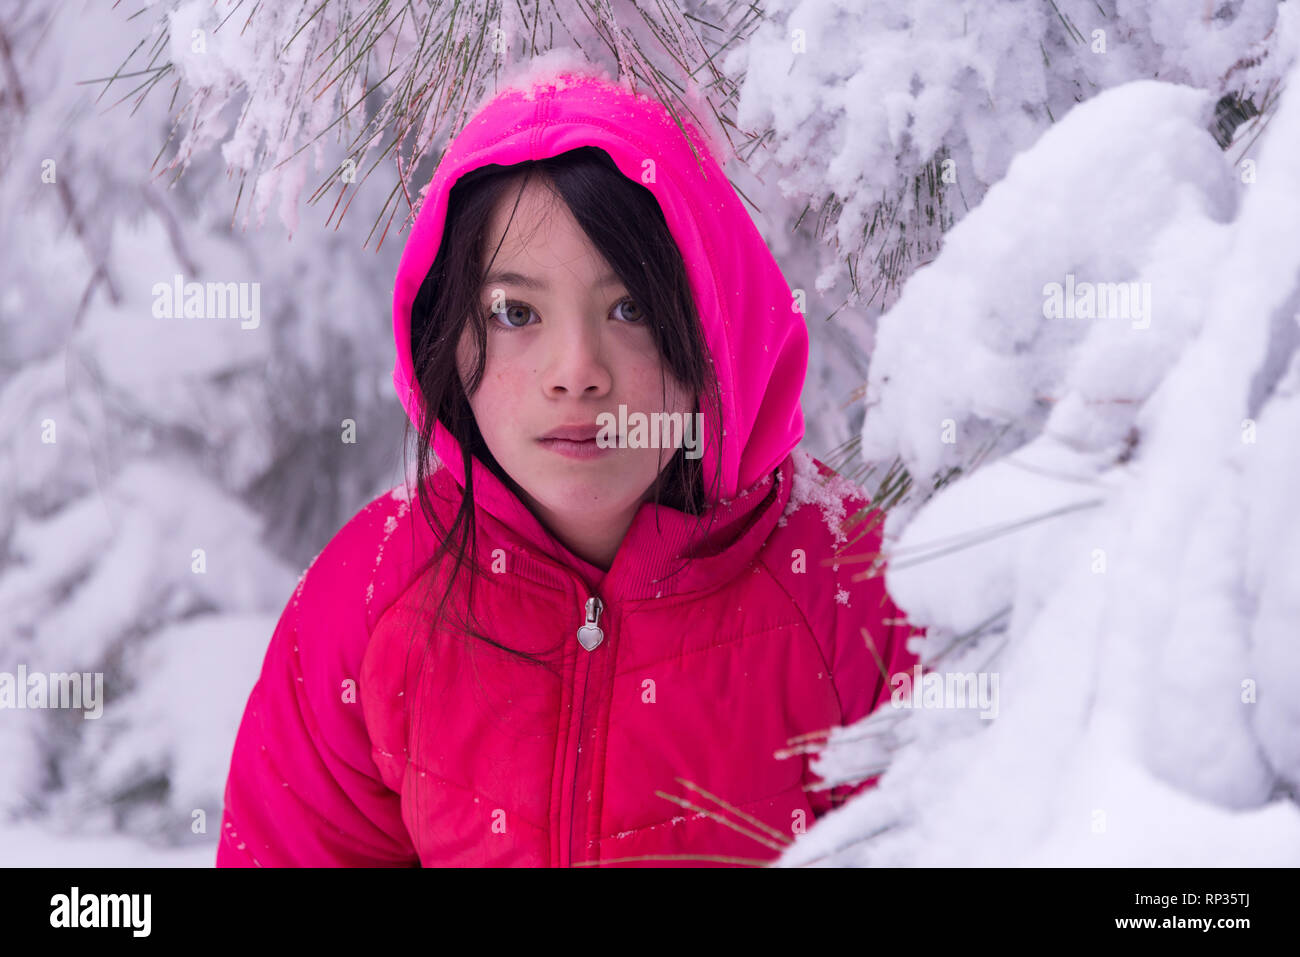 Young girl standing in snow covered trees with pink jacket Stock Photo